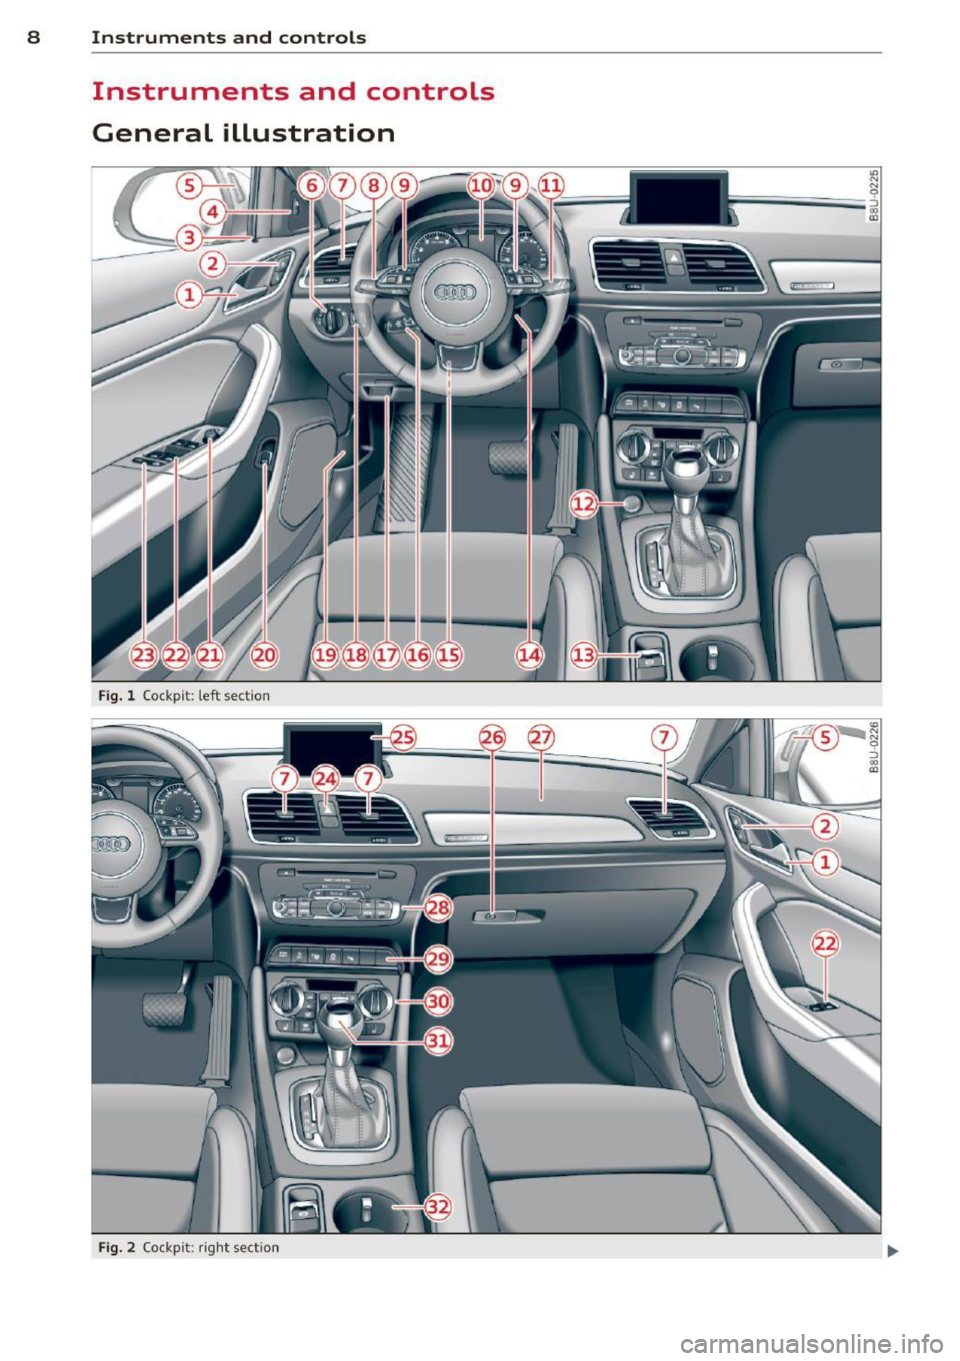 AUDI Q3 2015  Owners Manual 8  Instruments and controls 
Instruments  and  controls 
General  illustration 
Fig. l Cockp it:  left  sect io n 
Fig. 2 Cockp it : ri ght  sect io n  